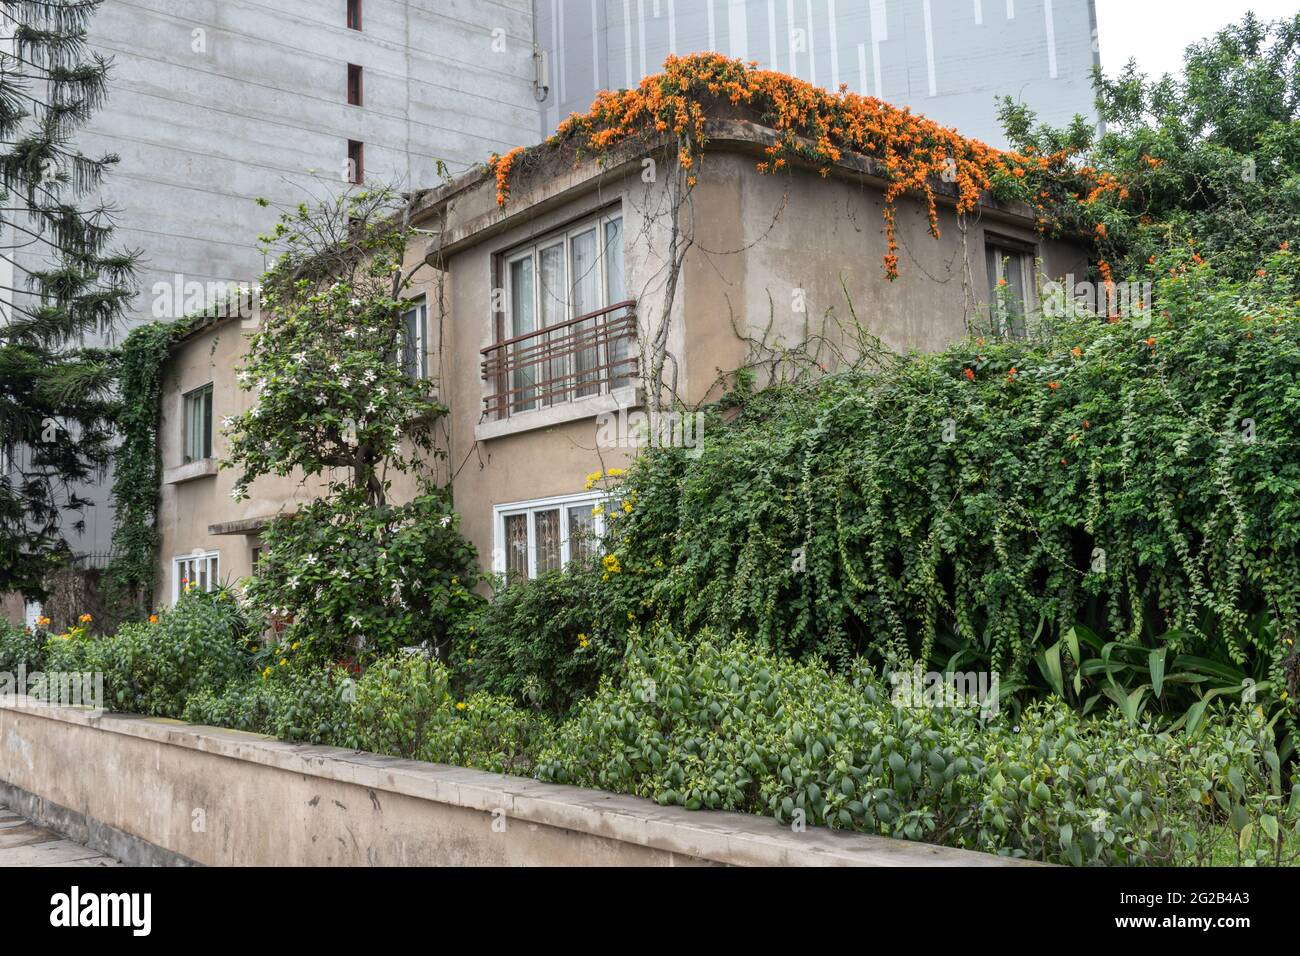 An old house covered in plant growth sits next to modern new buildings in the Miraflores district in Lima, Peru Stock Photo